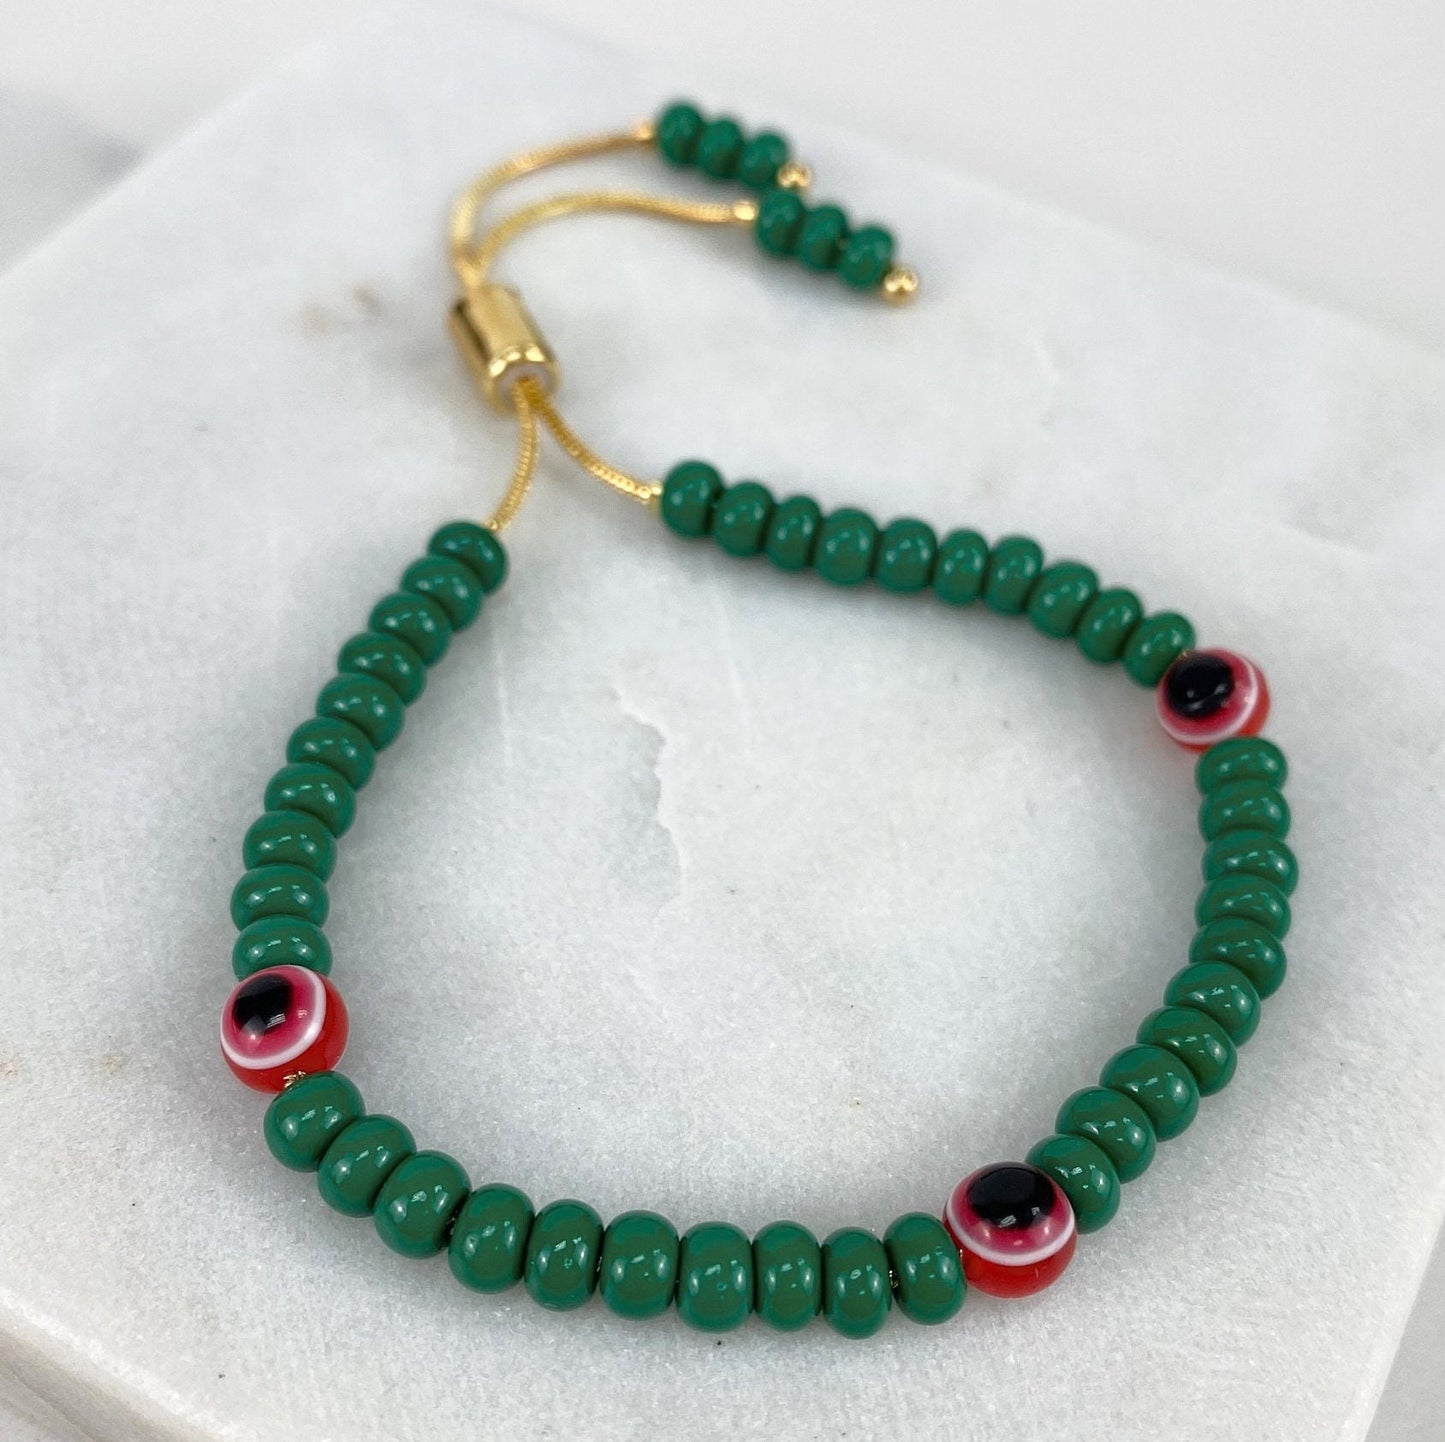 18k Gold Filled 1mm Snake Chain, Green Beads & Red Evil Eyes, Colored Adjustable Bracelet Wholesale Jewelry Supplies